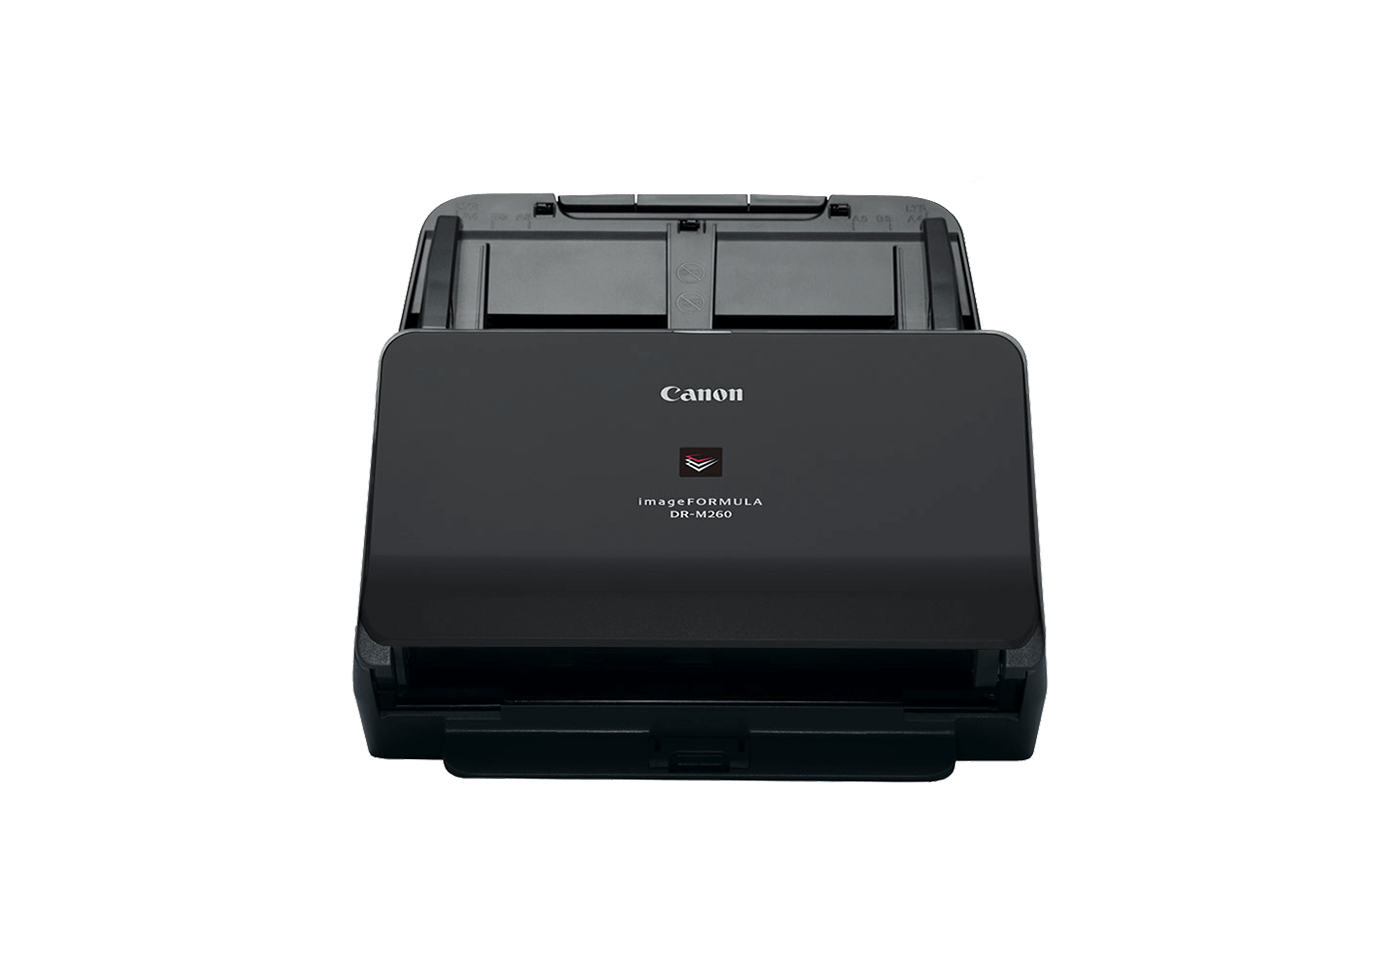 Product image of the Canon imageFORMULA DR M260 document scanner